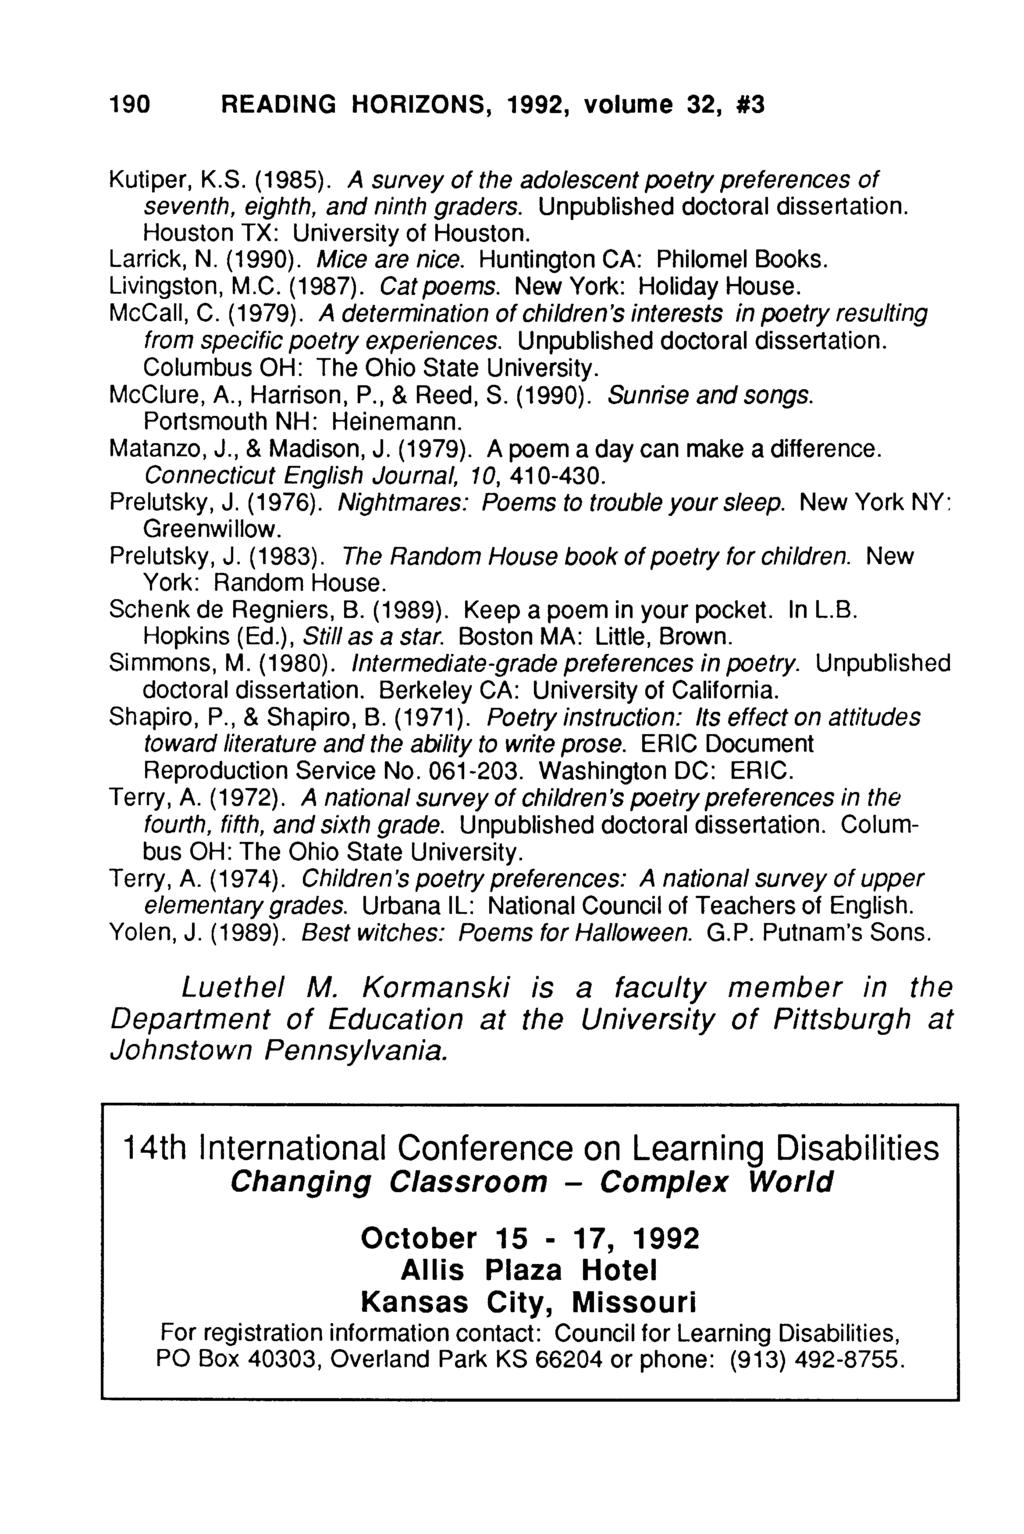 190 READING HORIZONS, 1992, volume 32, #3 Kutiper, K.S. (1985). A survey of the adolescent poetry preferences of seventh, eighth, and ninth graders. Unpublished doctoral dissertation.